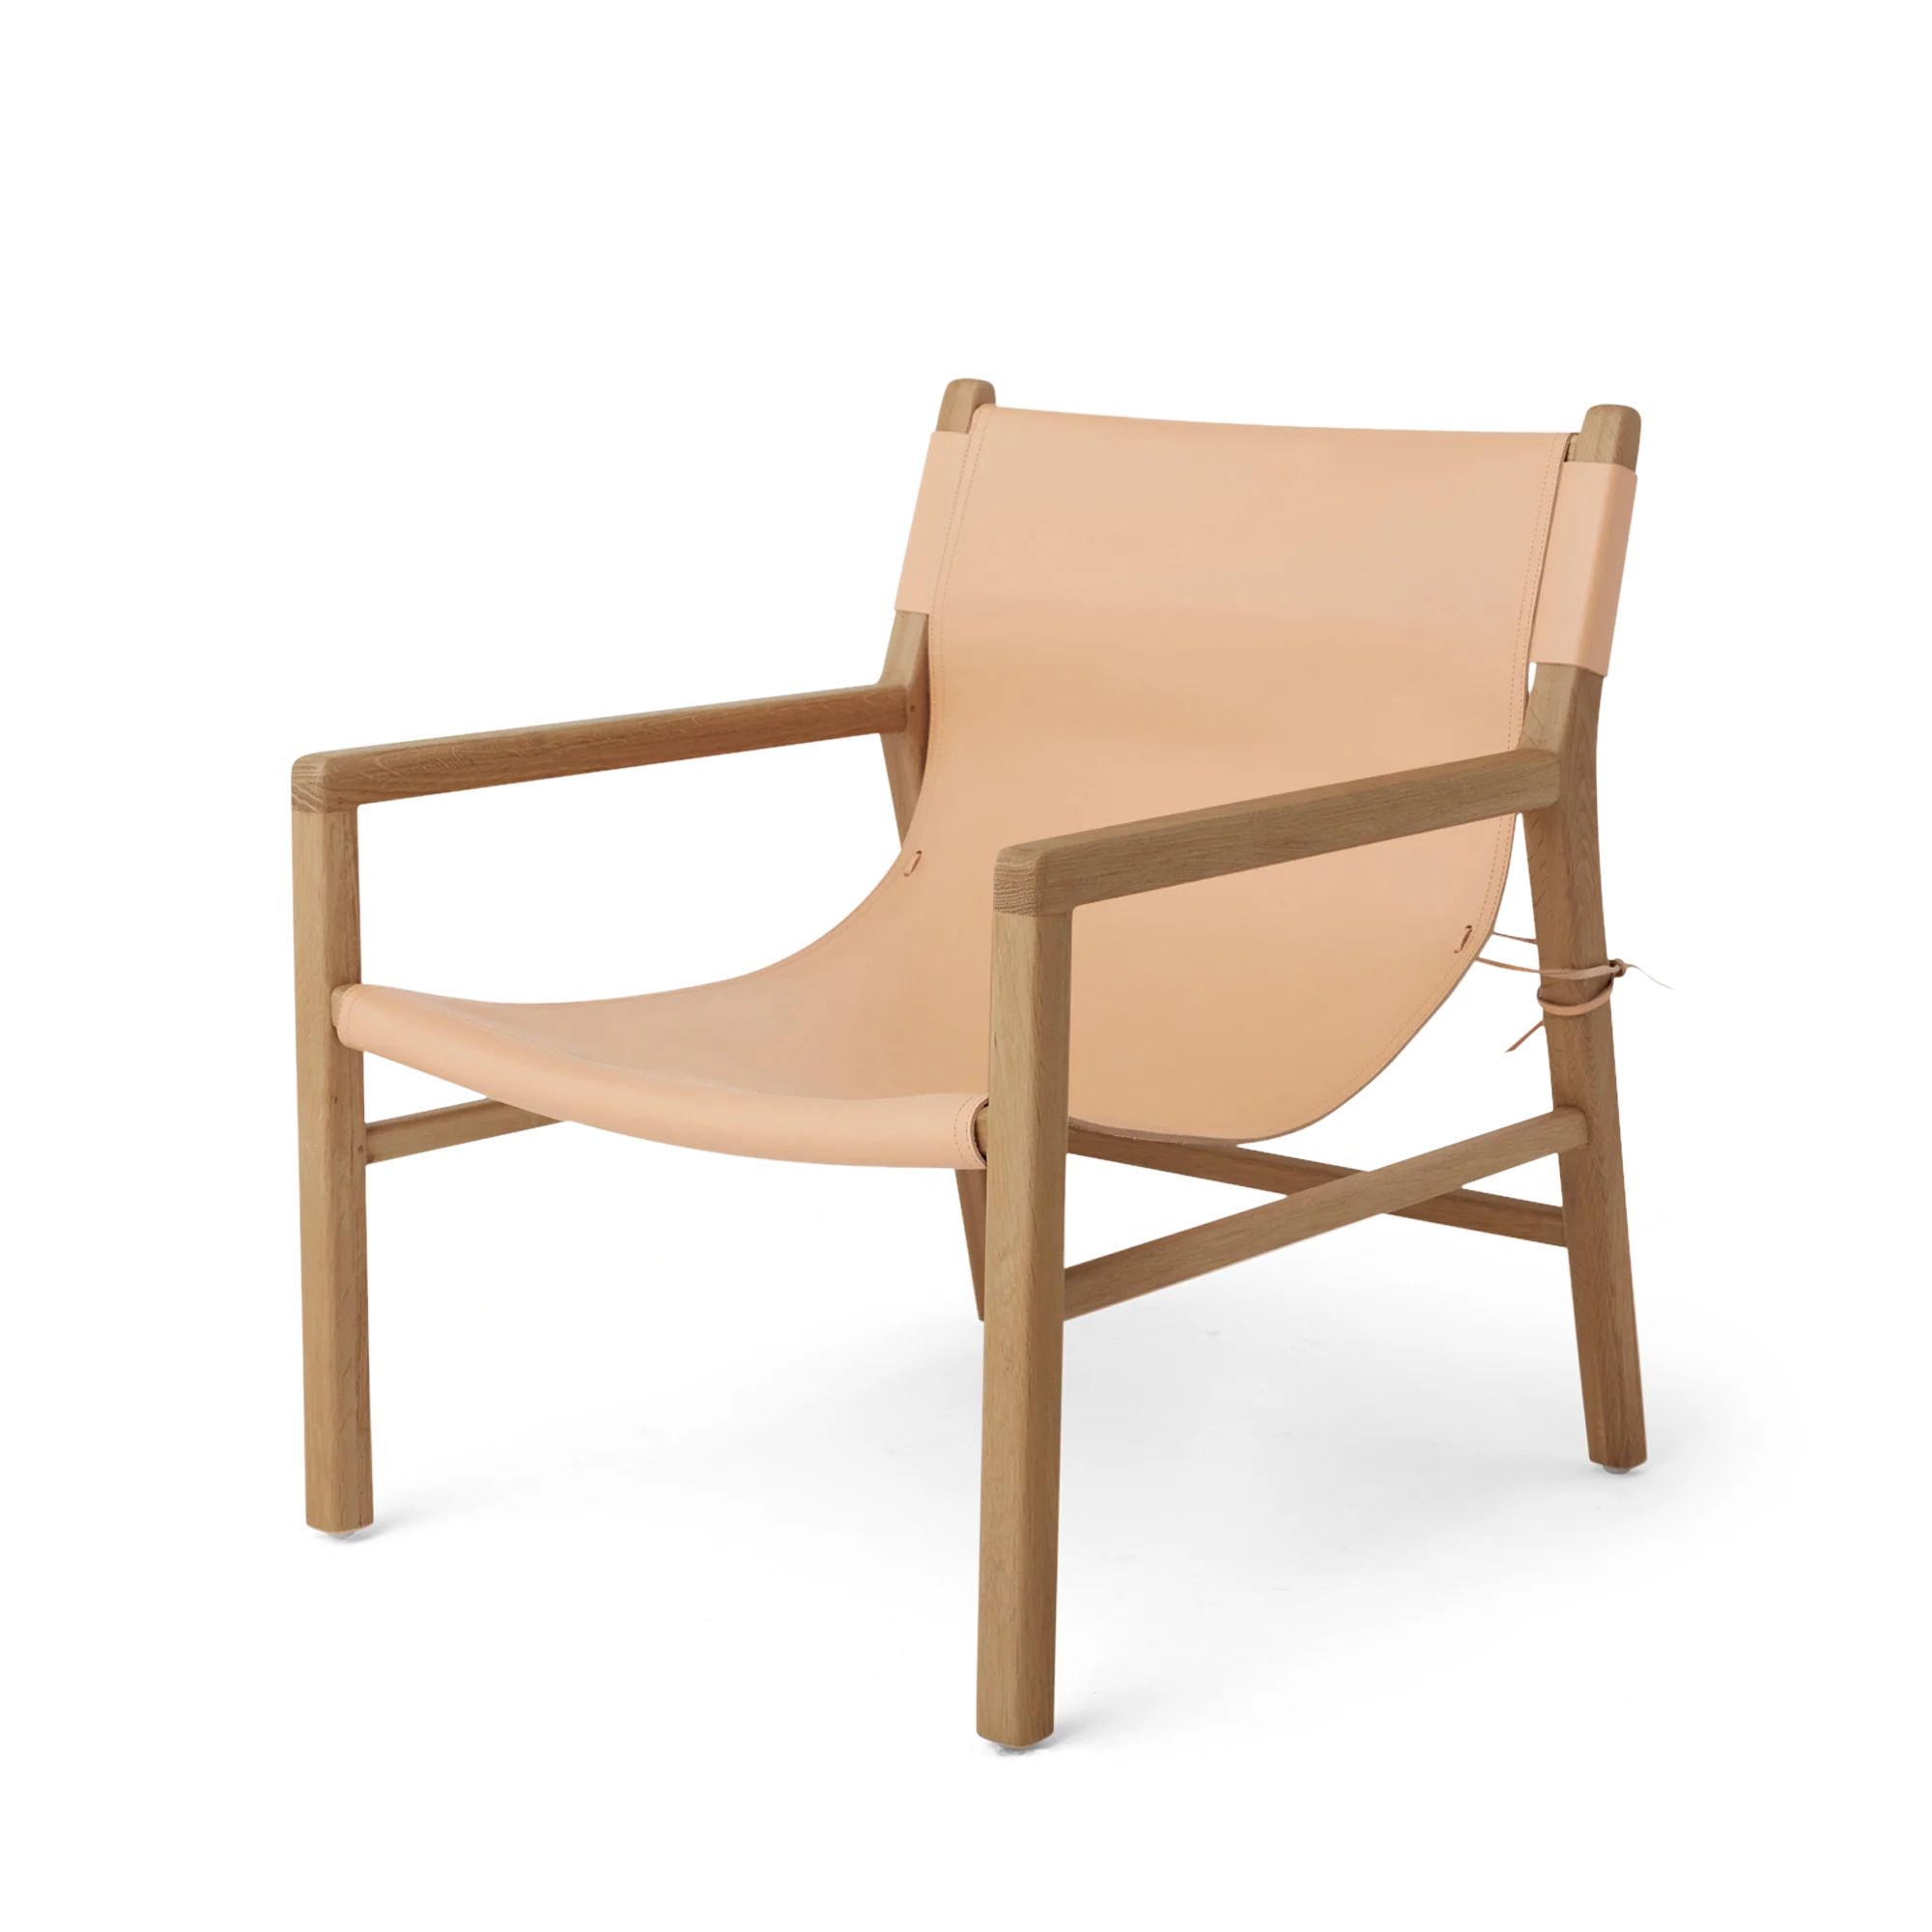 Lounge #1 - Sling Lounge in Oak with Neutral Leather | Hati Home